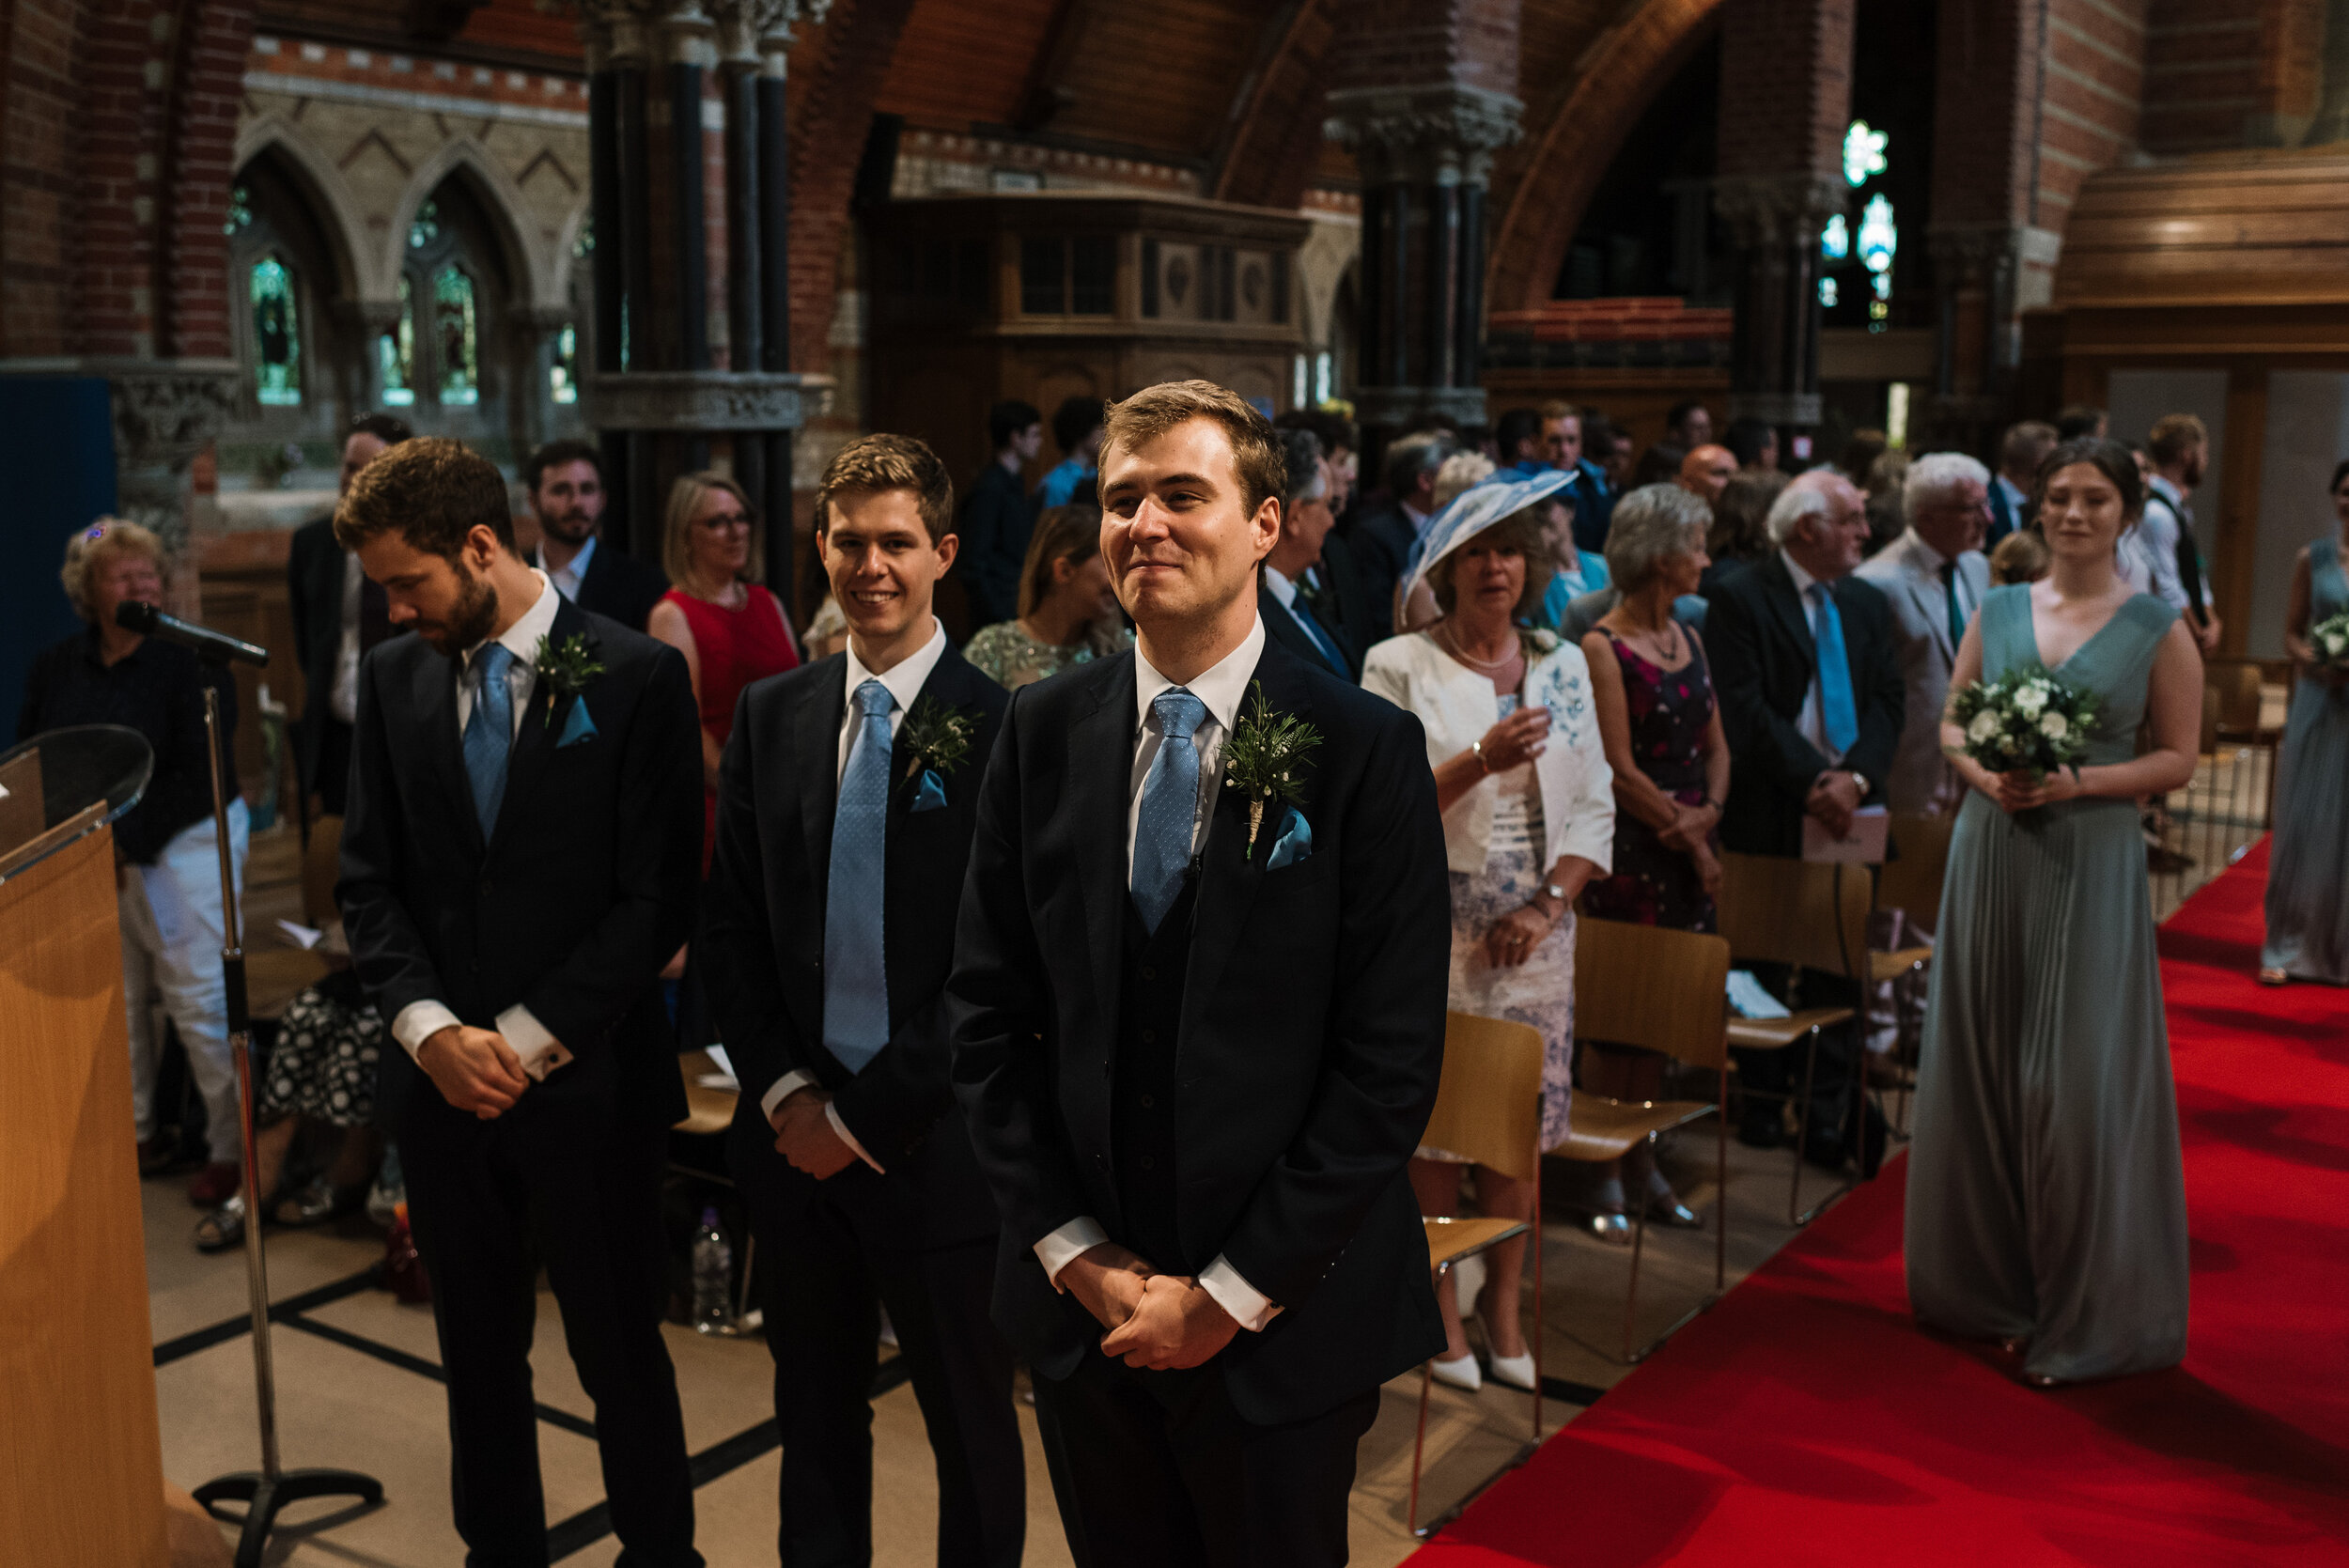 Groom and ushers waiting for bride to walk up church aisle